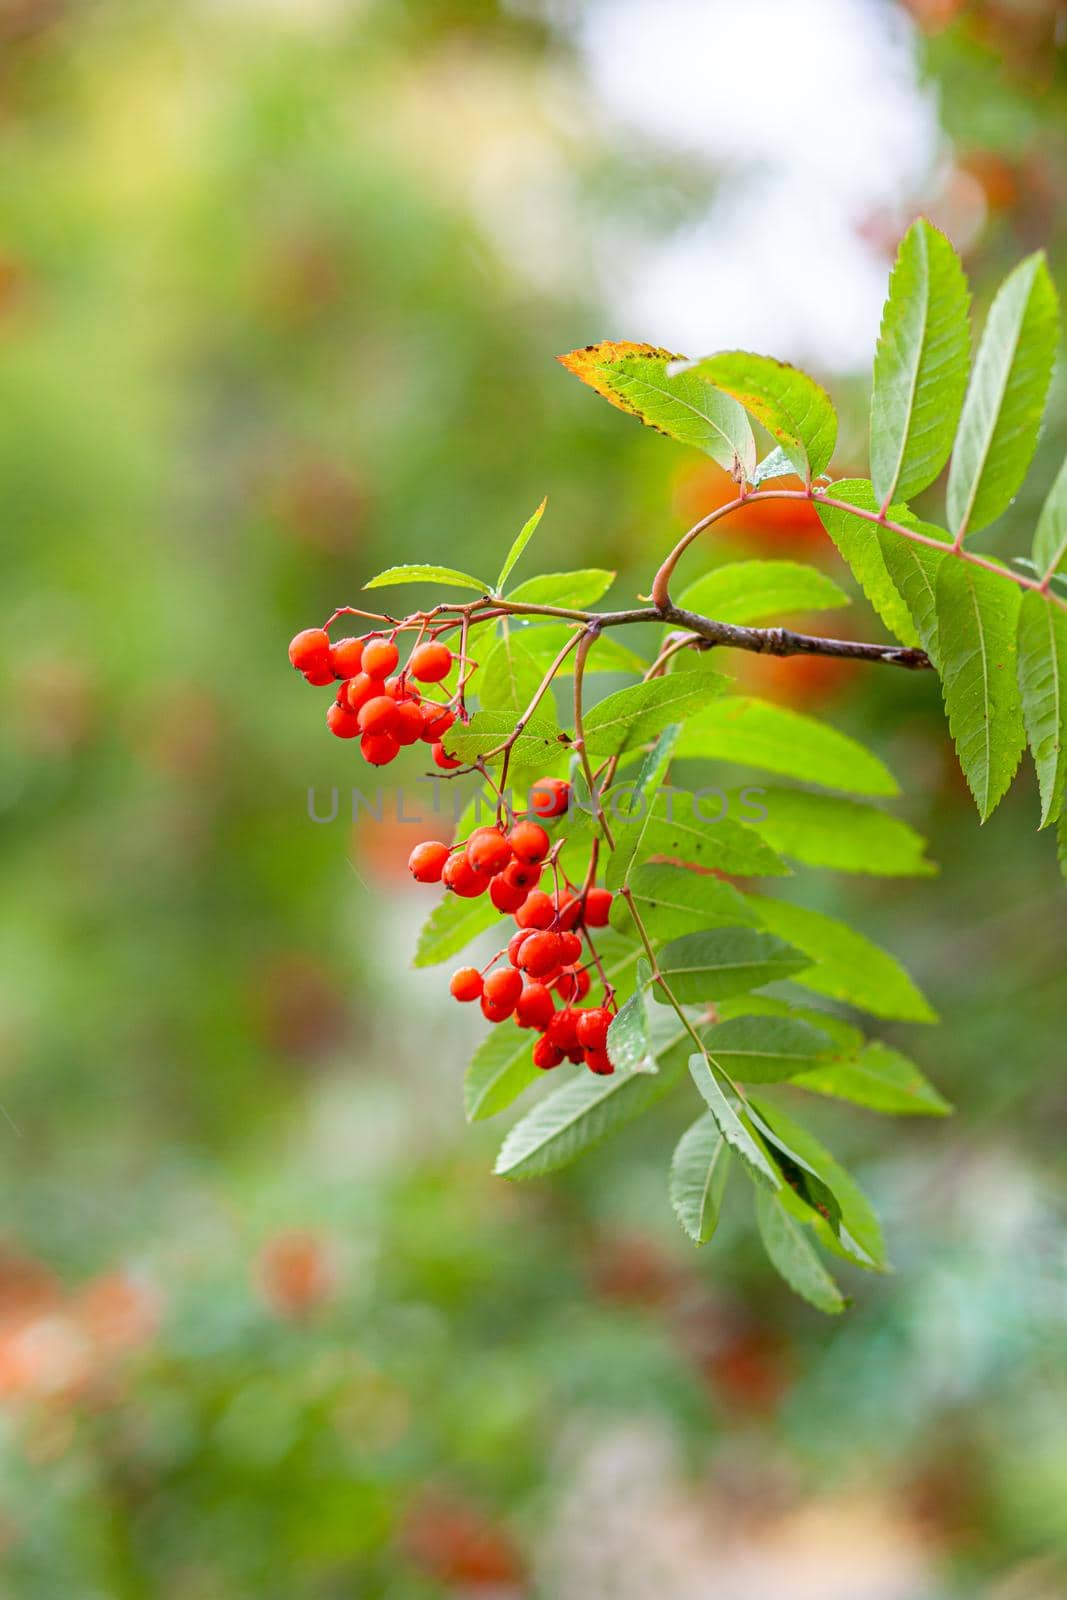 Mountain rowan ash branch berries on blurred green background. Autumn harvest still life scene. Soft focus backdrop photography. Copy space.